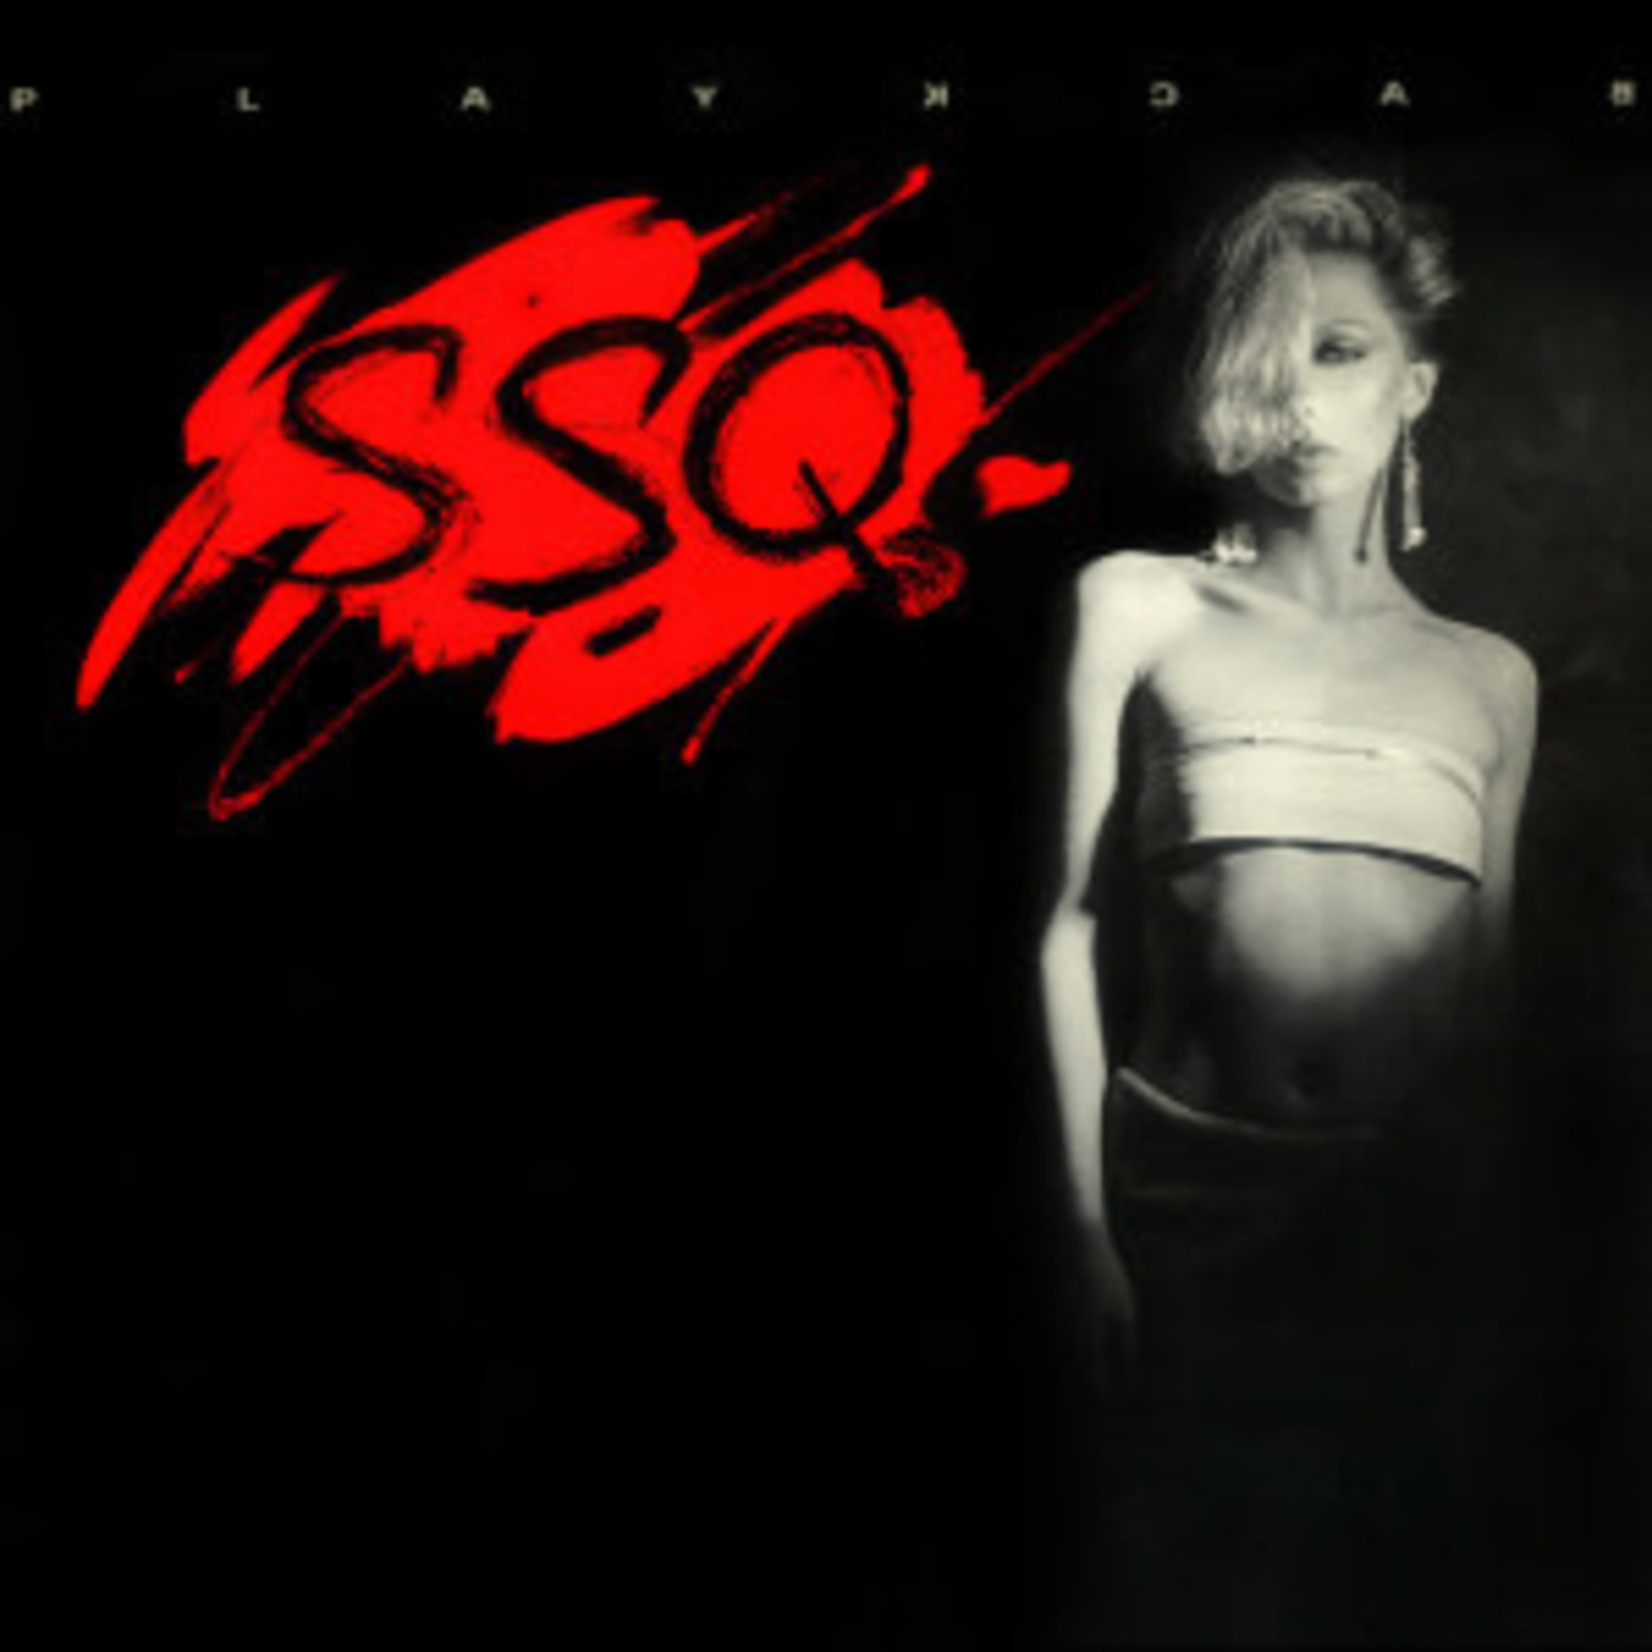 SSQ: PLAYBACK [file: Stacey Q]